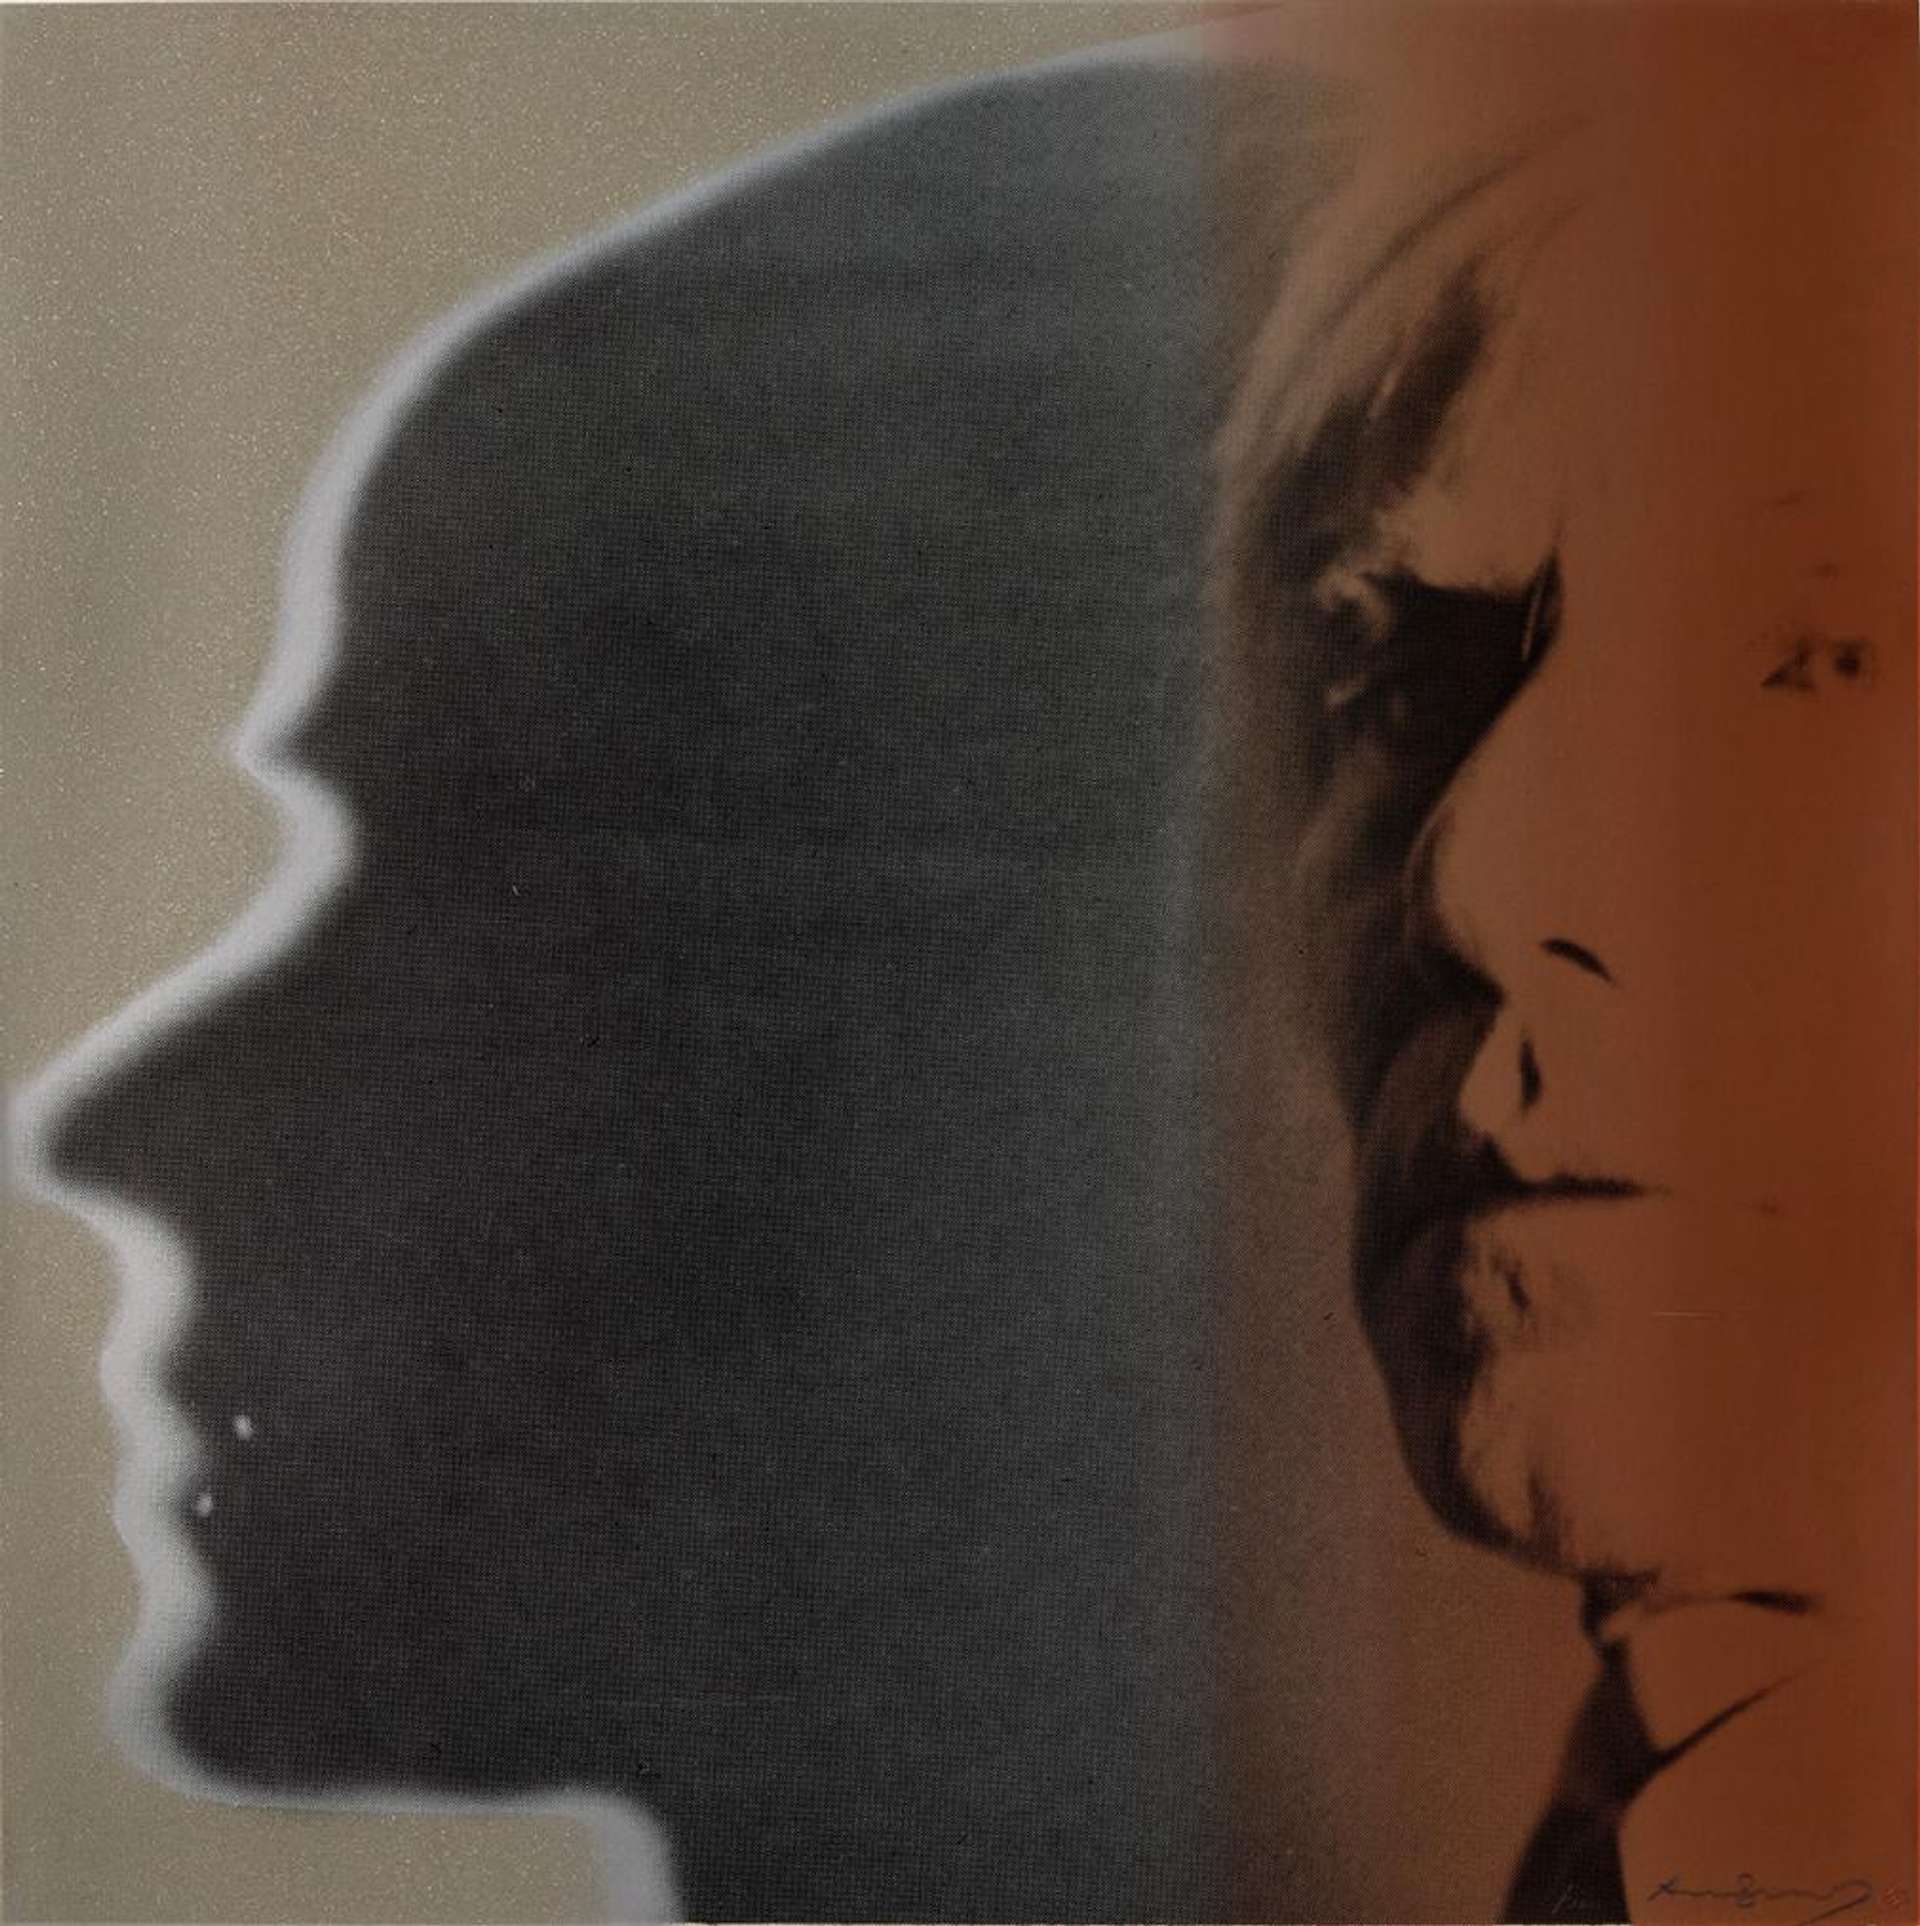 The print shows a portrait of the artist Andy Warhol rendered in a warm red, captured staring out of the composition at the viewer. The portrait is unconventional as the sitter does not dominate the centre of the composition. Warhol appears standing to the right of the composition and is set against the silhouette of another person’s side profile. The dark, shadowy profile contrasts with Warhol’s red face and seems to lurk ominously behind him.